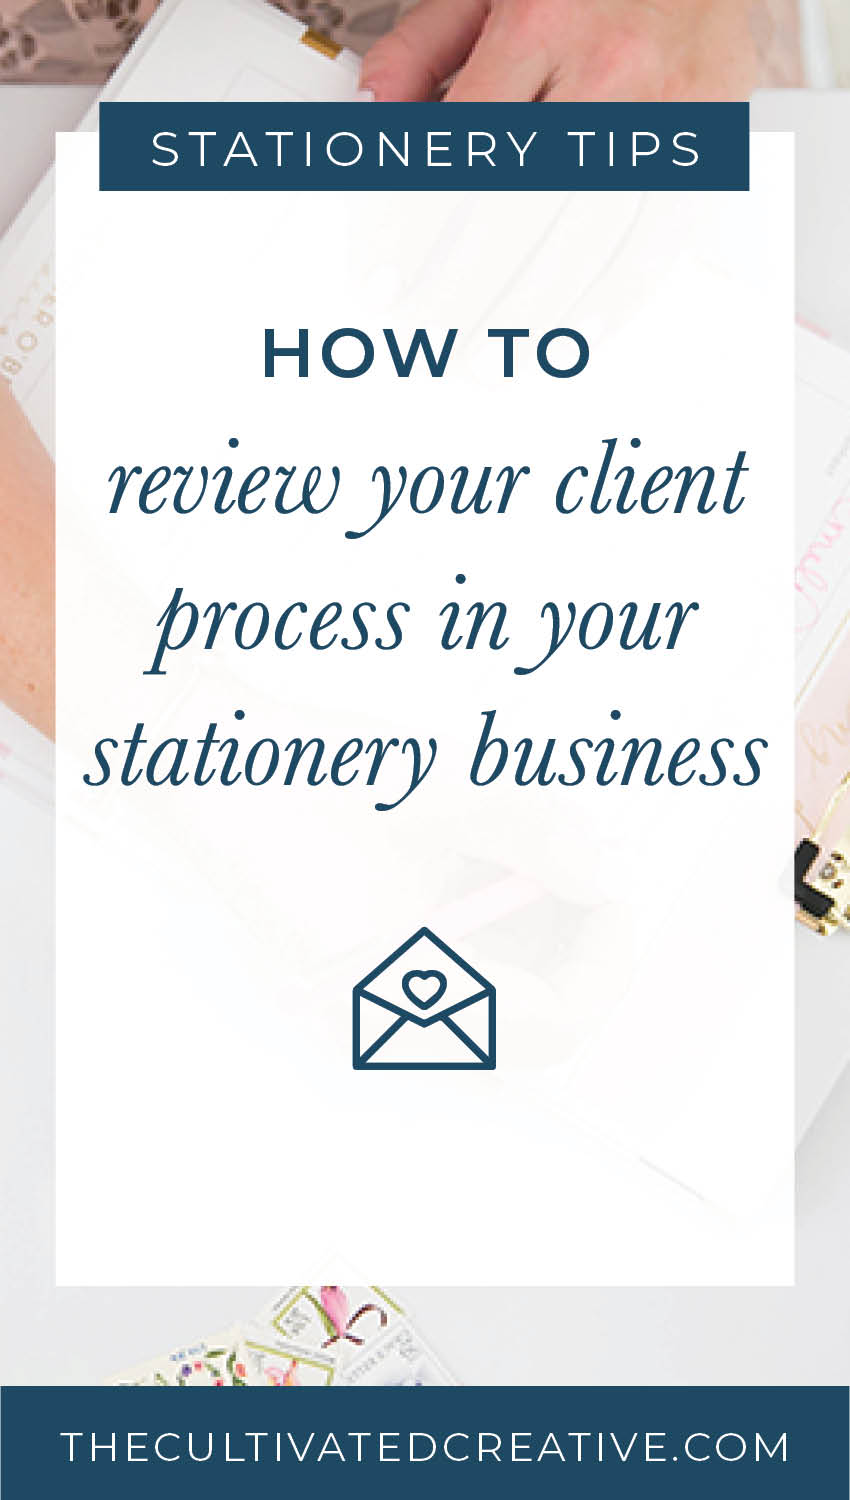 The importance of your client process in your stationery business